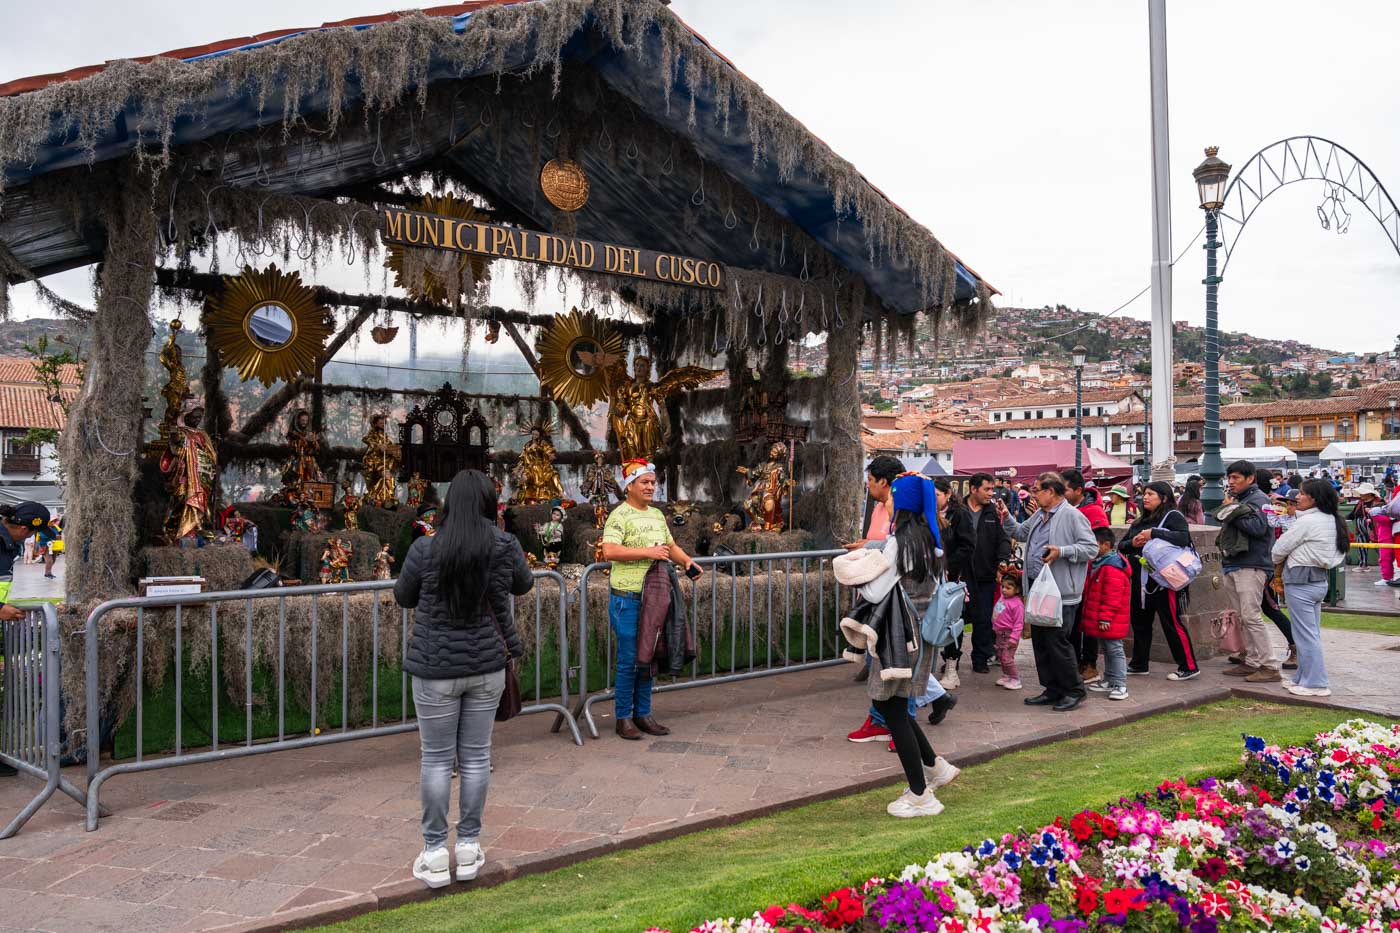 People queueing up at the giant nativity scene in Plaza de Armas in Cusco.